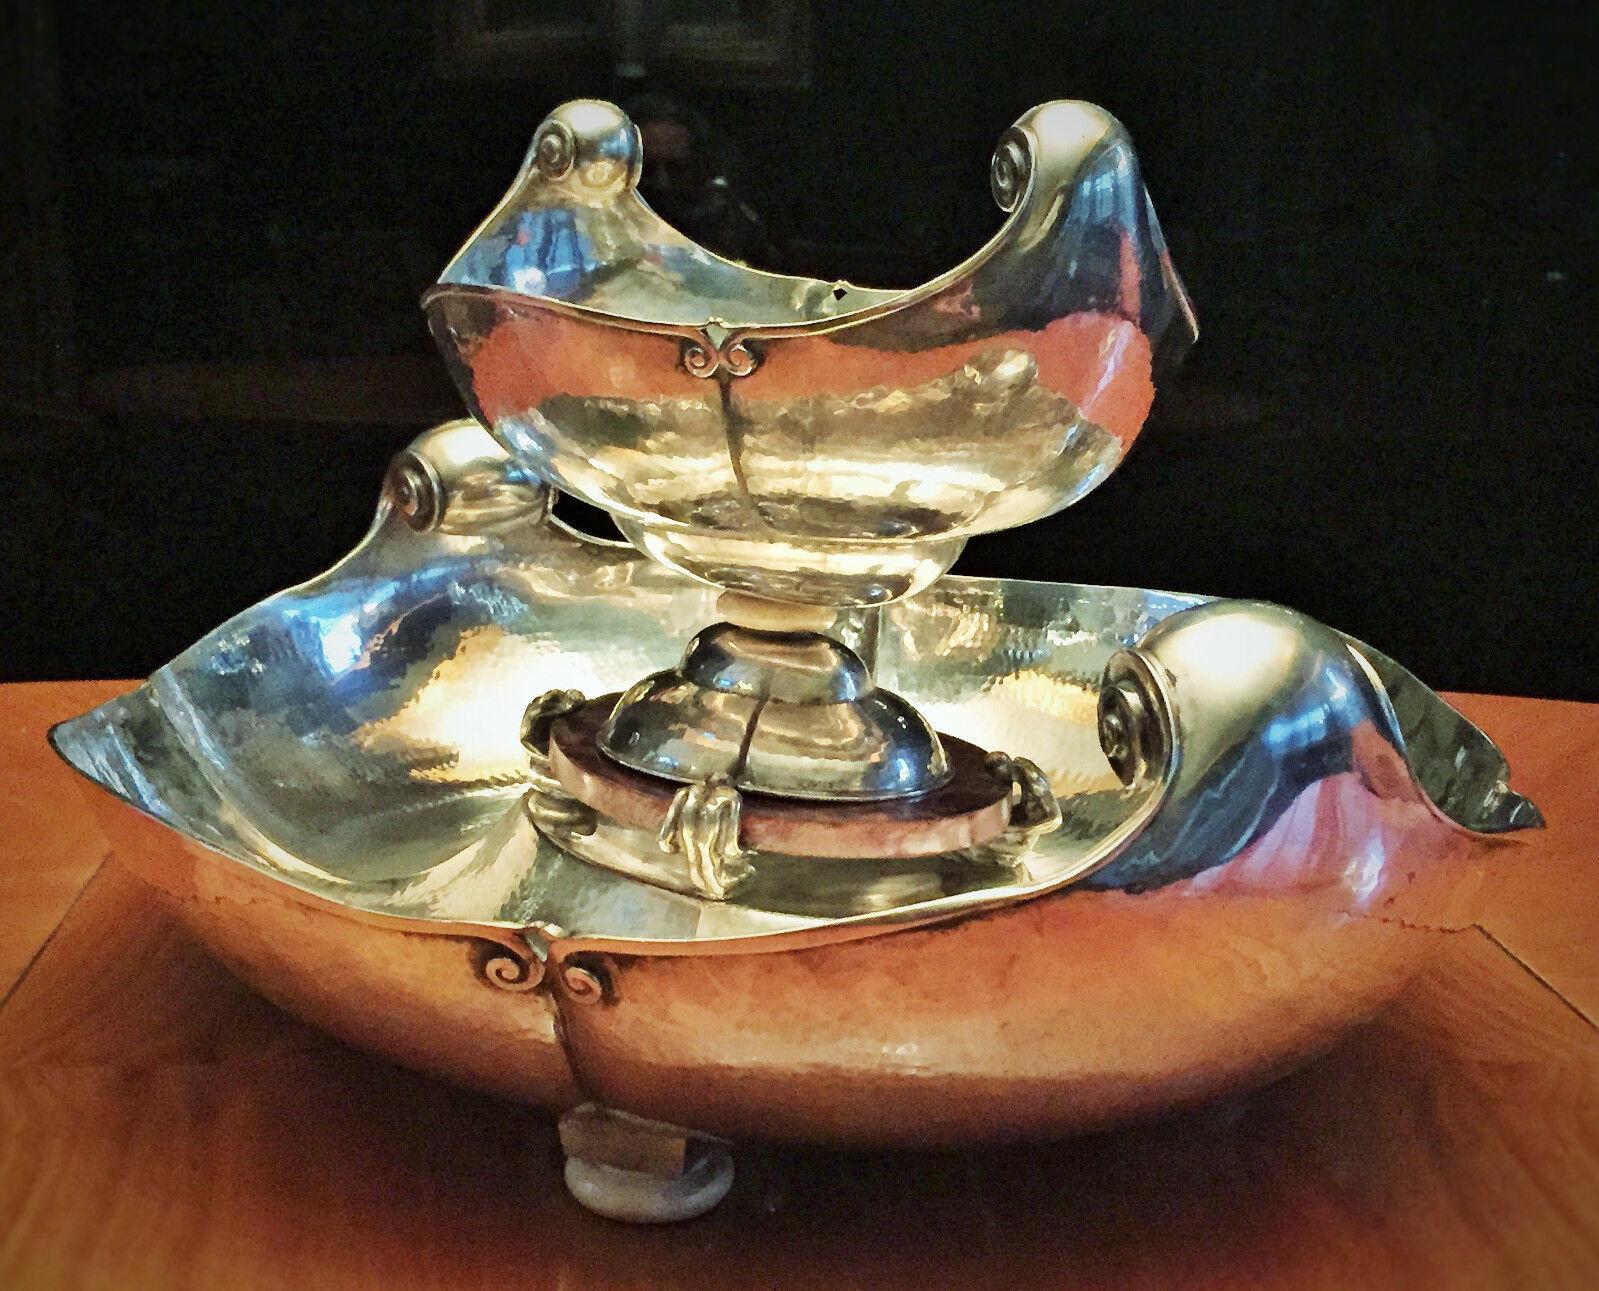 Hallmarks: S.A. Calderoni, Milano, 800.

Weight: 160.14 troy ounces (5 kg 794 g), including non-silver material.

DIMENSIONS:
Overall height: 12inches

Bottom vessel dimensions:
Length: 21 inches
Depth: 18.5 inches
Height: 7.5 inches

Top vessel